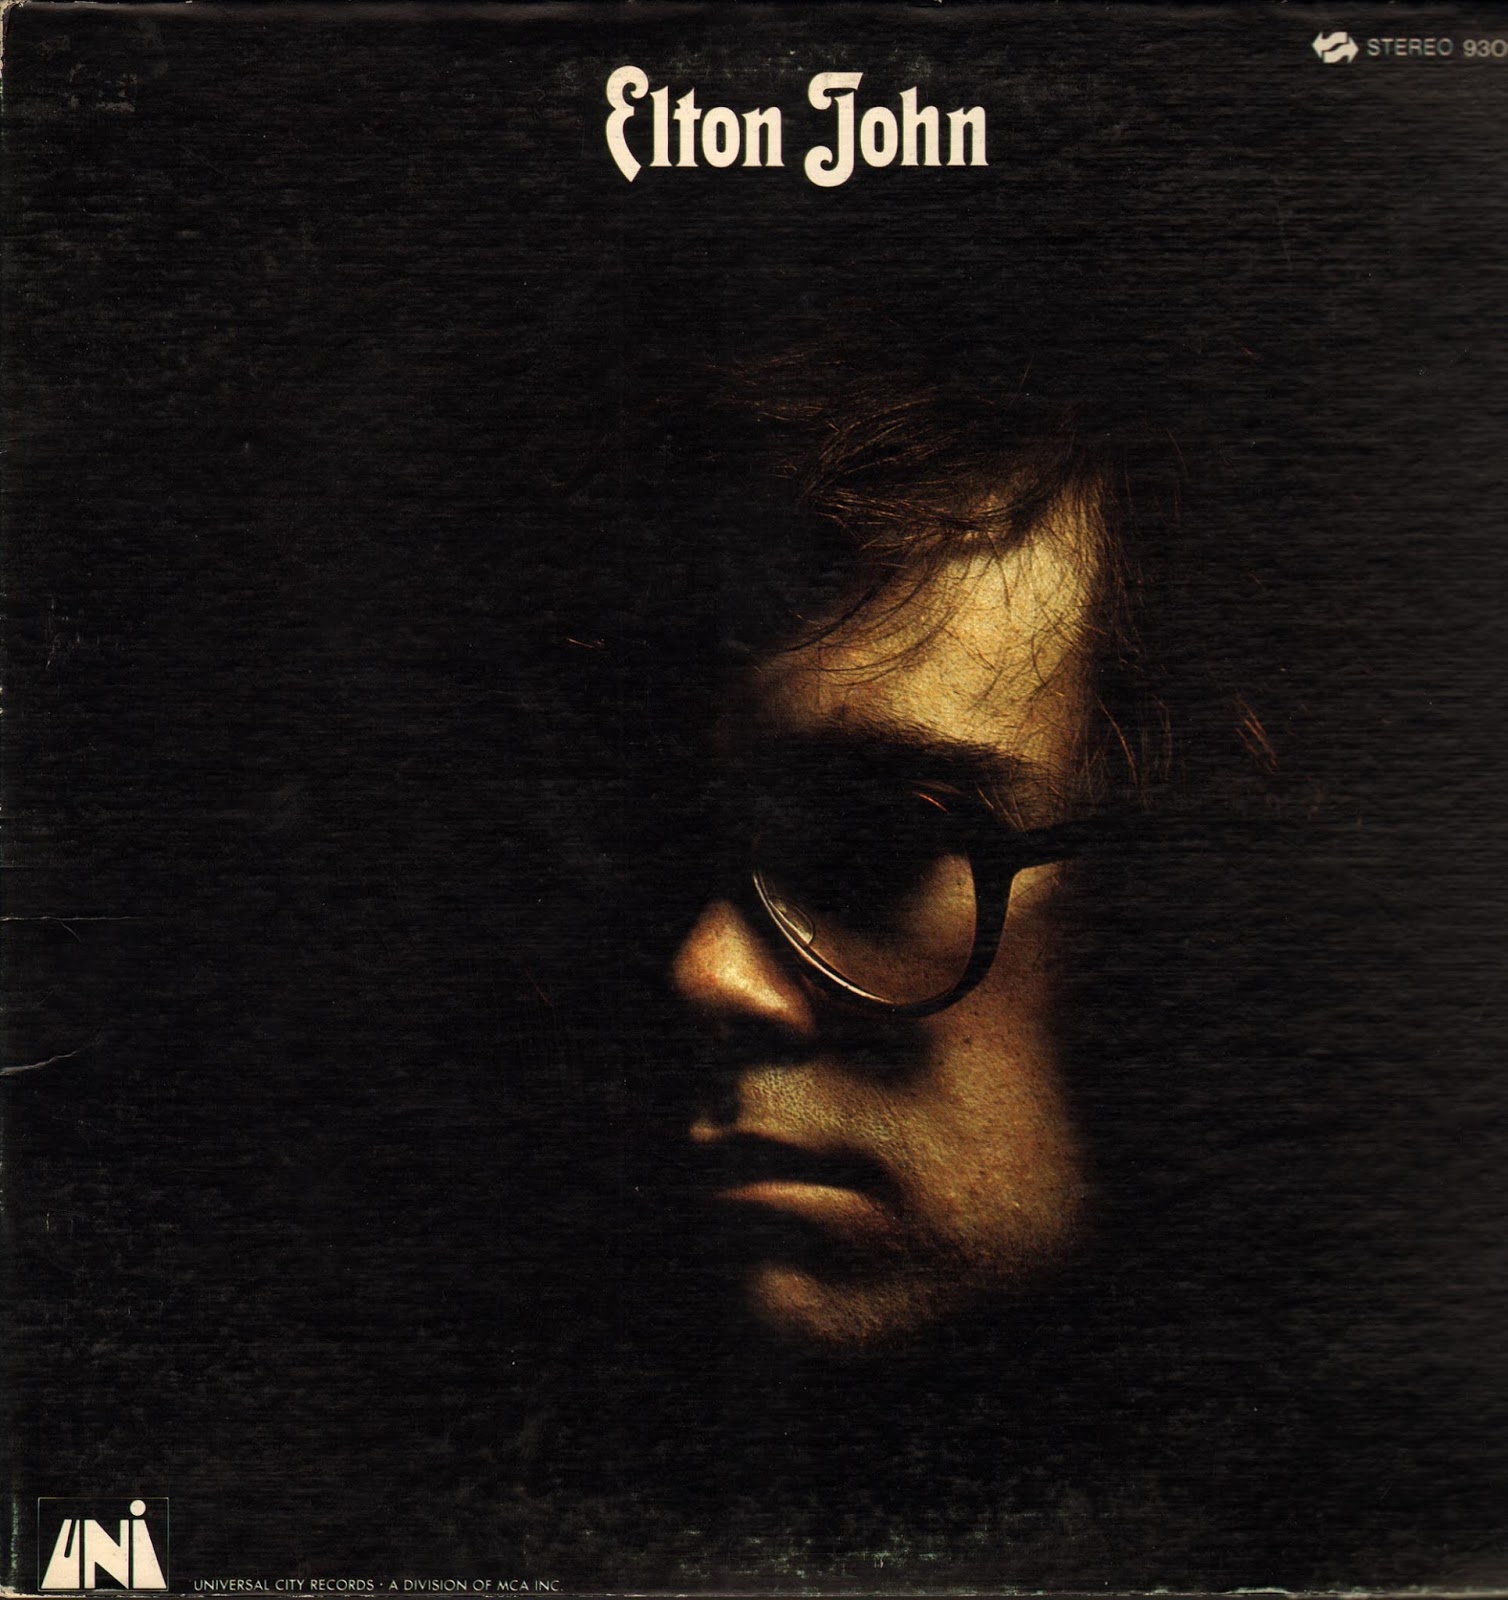 elton john album cover songs from the west coast